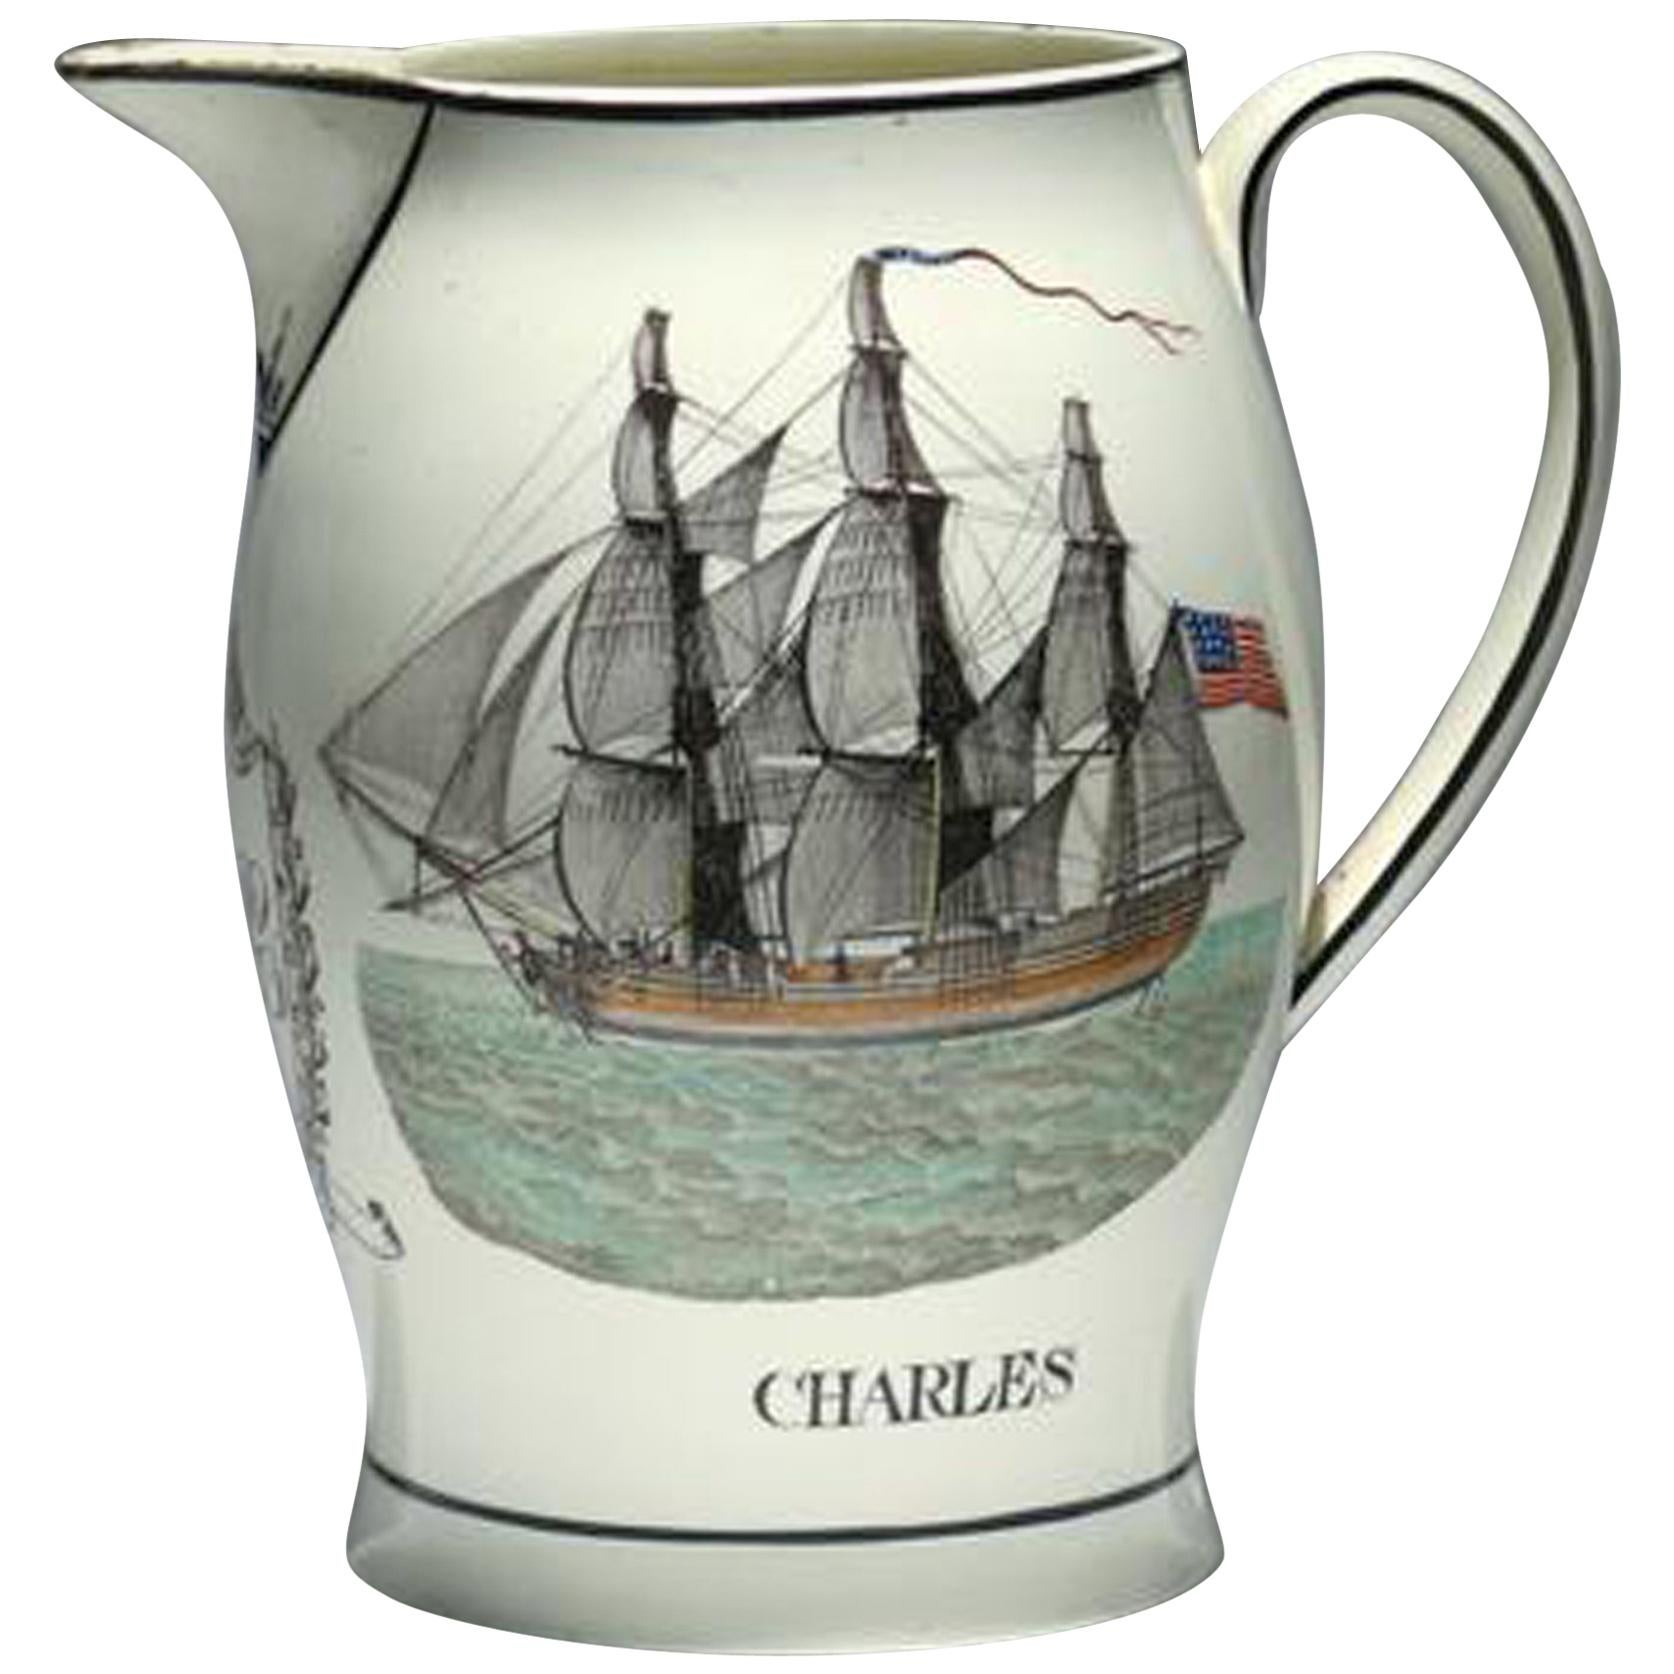 Liverpool Large Creamware Jug with American Ship, Inscribed Charles